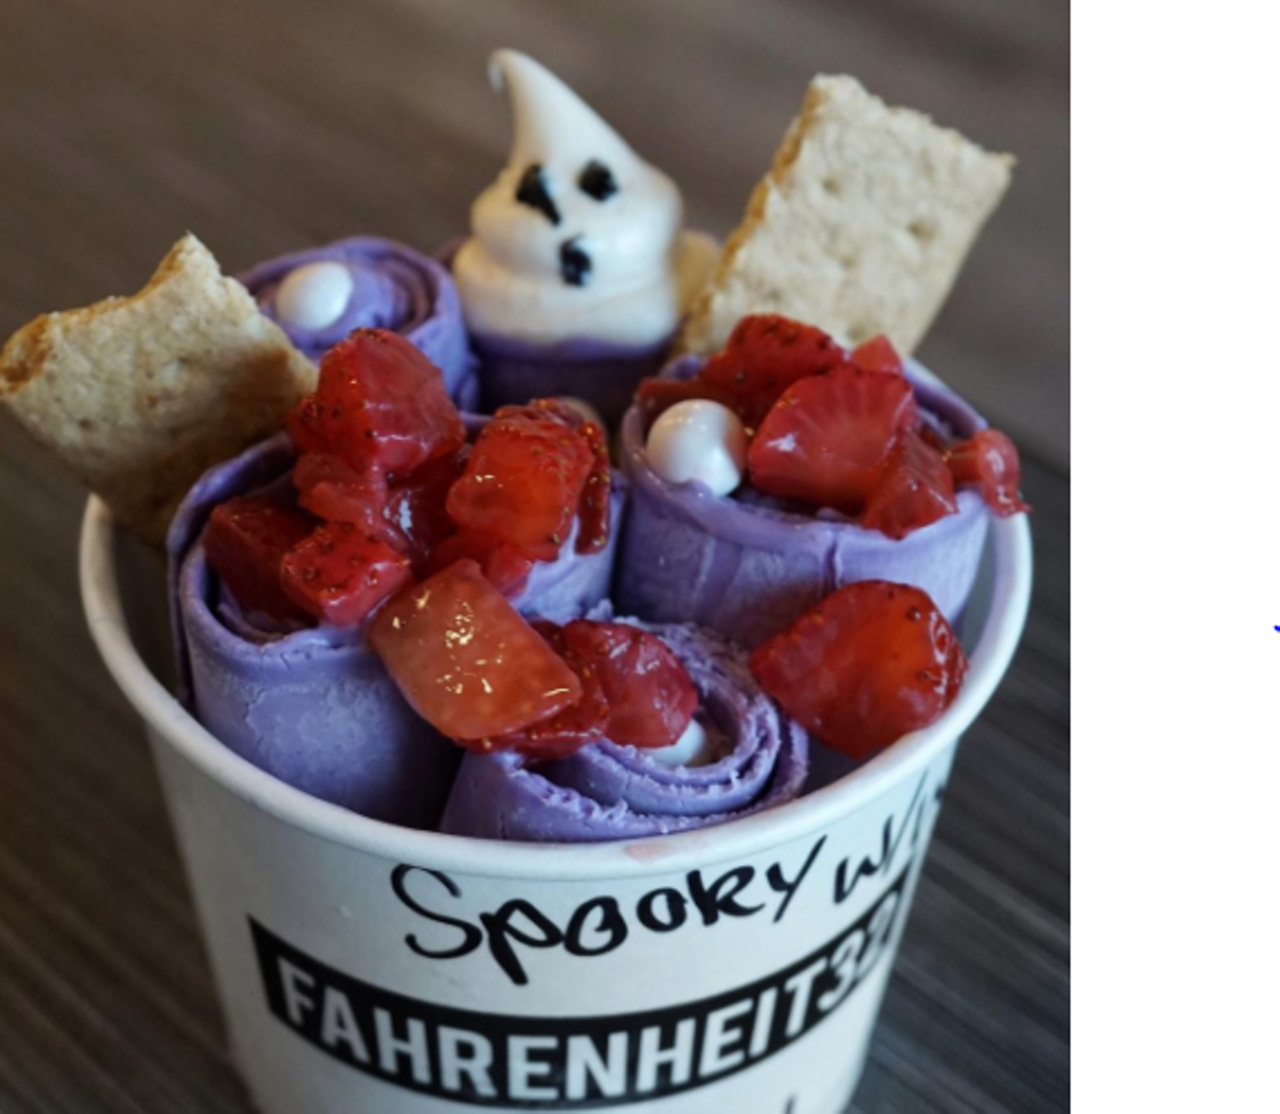 Fahrenheit 32
226 W. Bitters Road, (210) 627-6232, facebook.com
Thai ice cream has never been spookier than those topped with scary ghostly toppings.
Photo via Instagram, safood.e